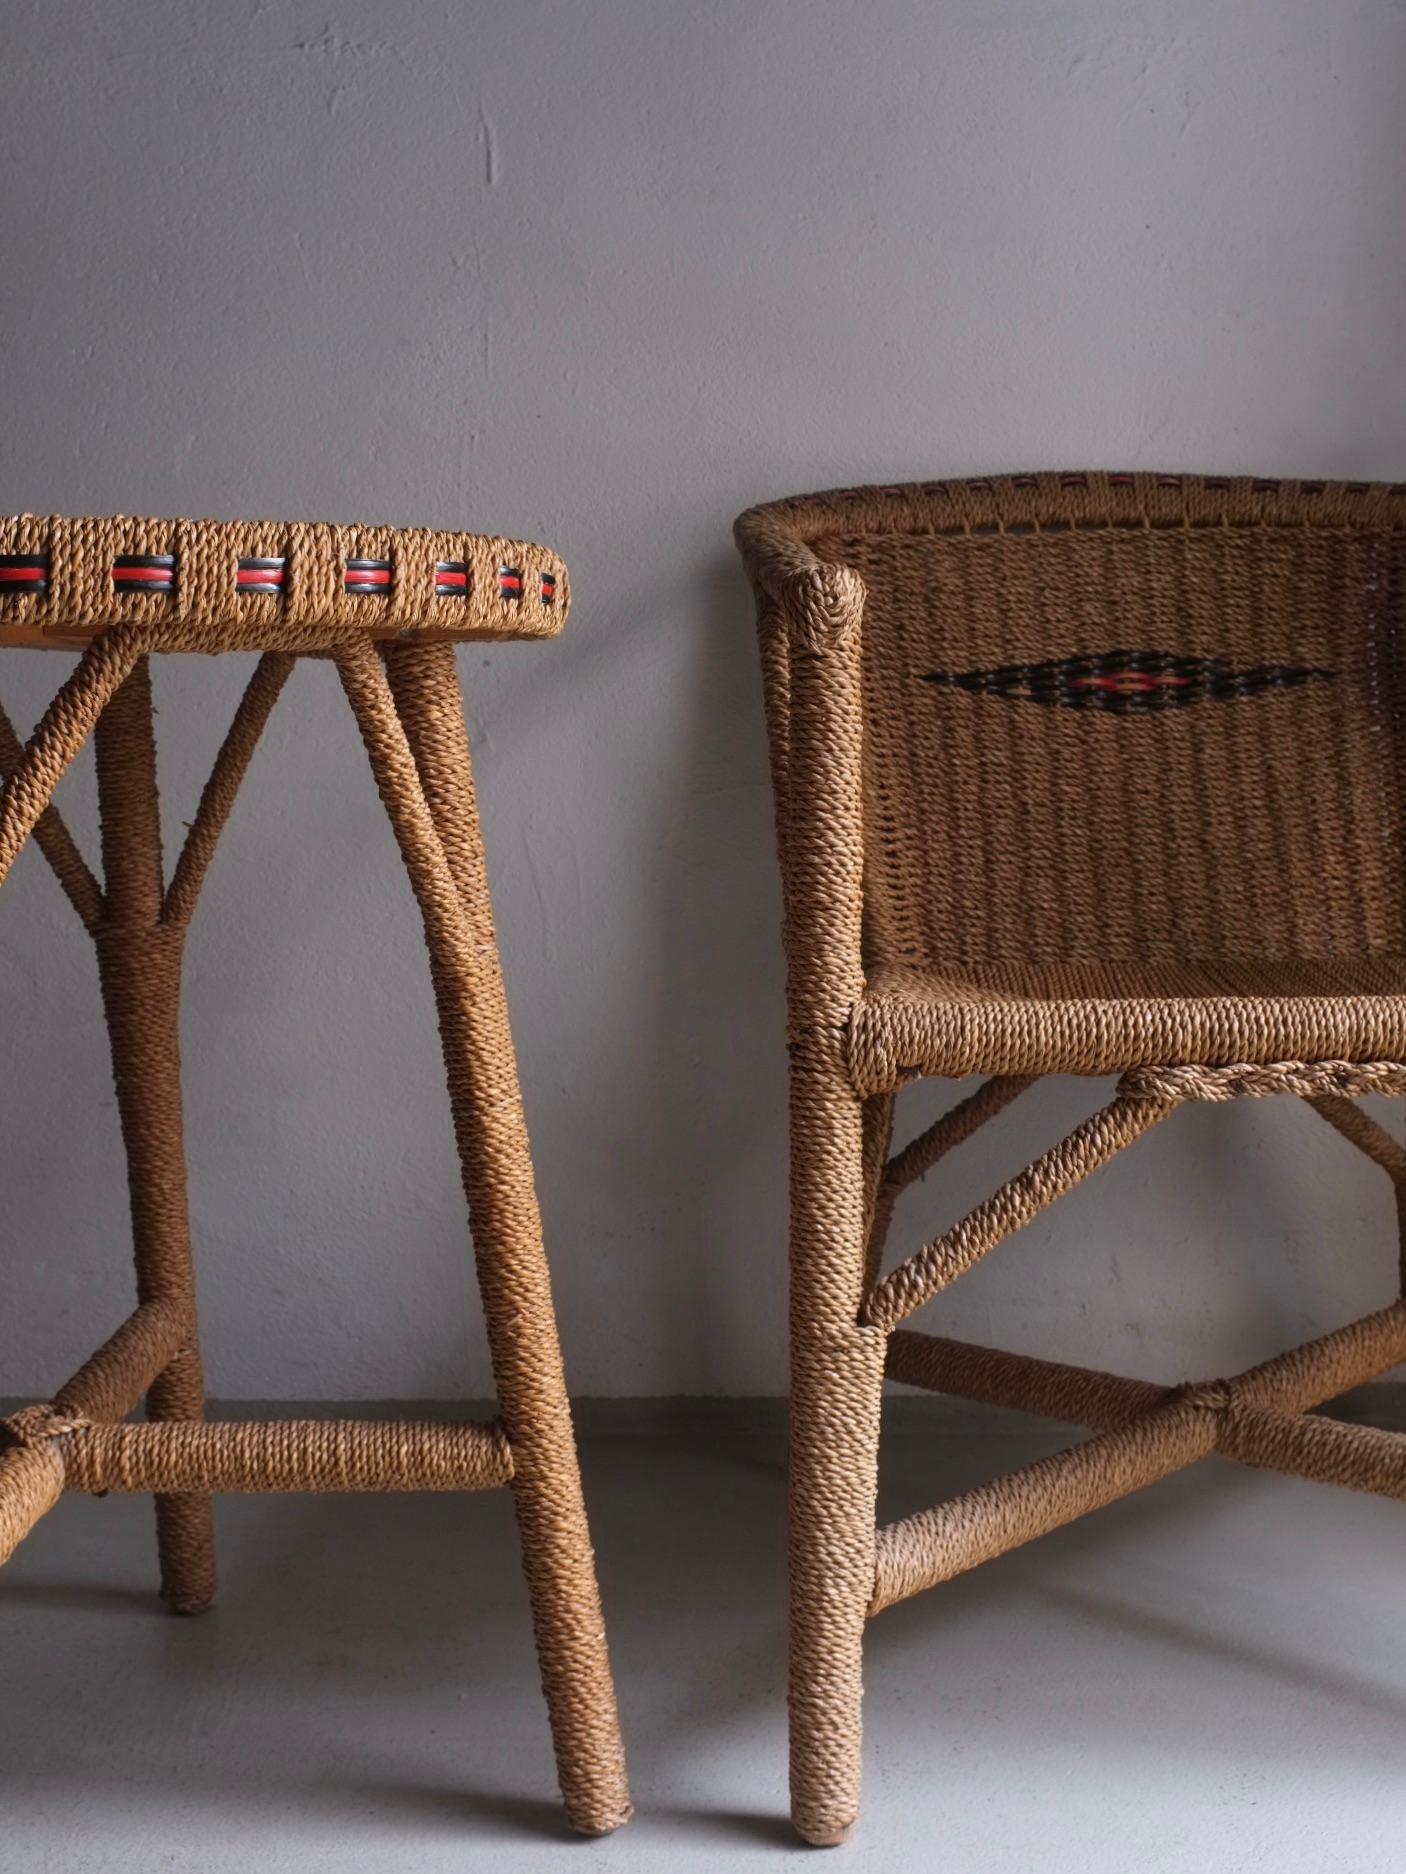 Woven Wicker Furniture Set Patio Garden, France 1970s In Good Condition For Sale In Rīga, LV